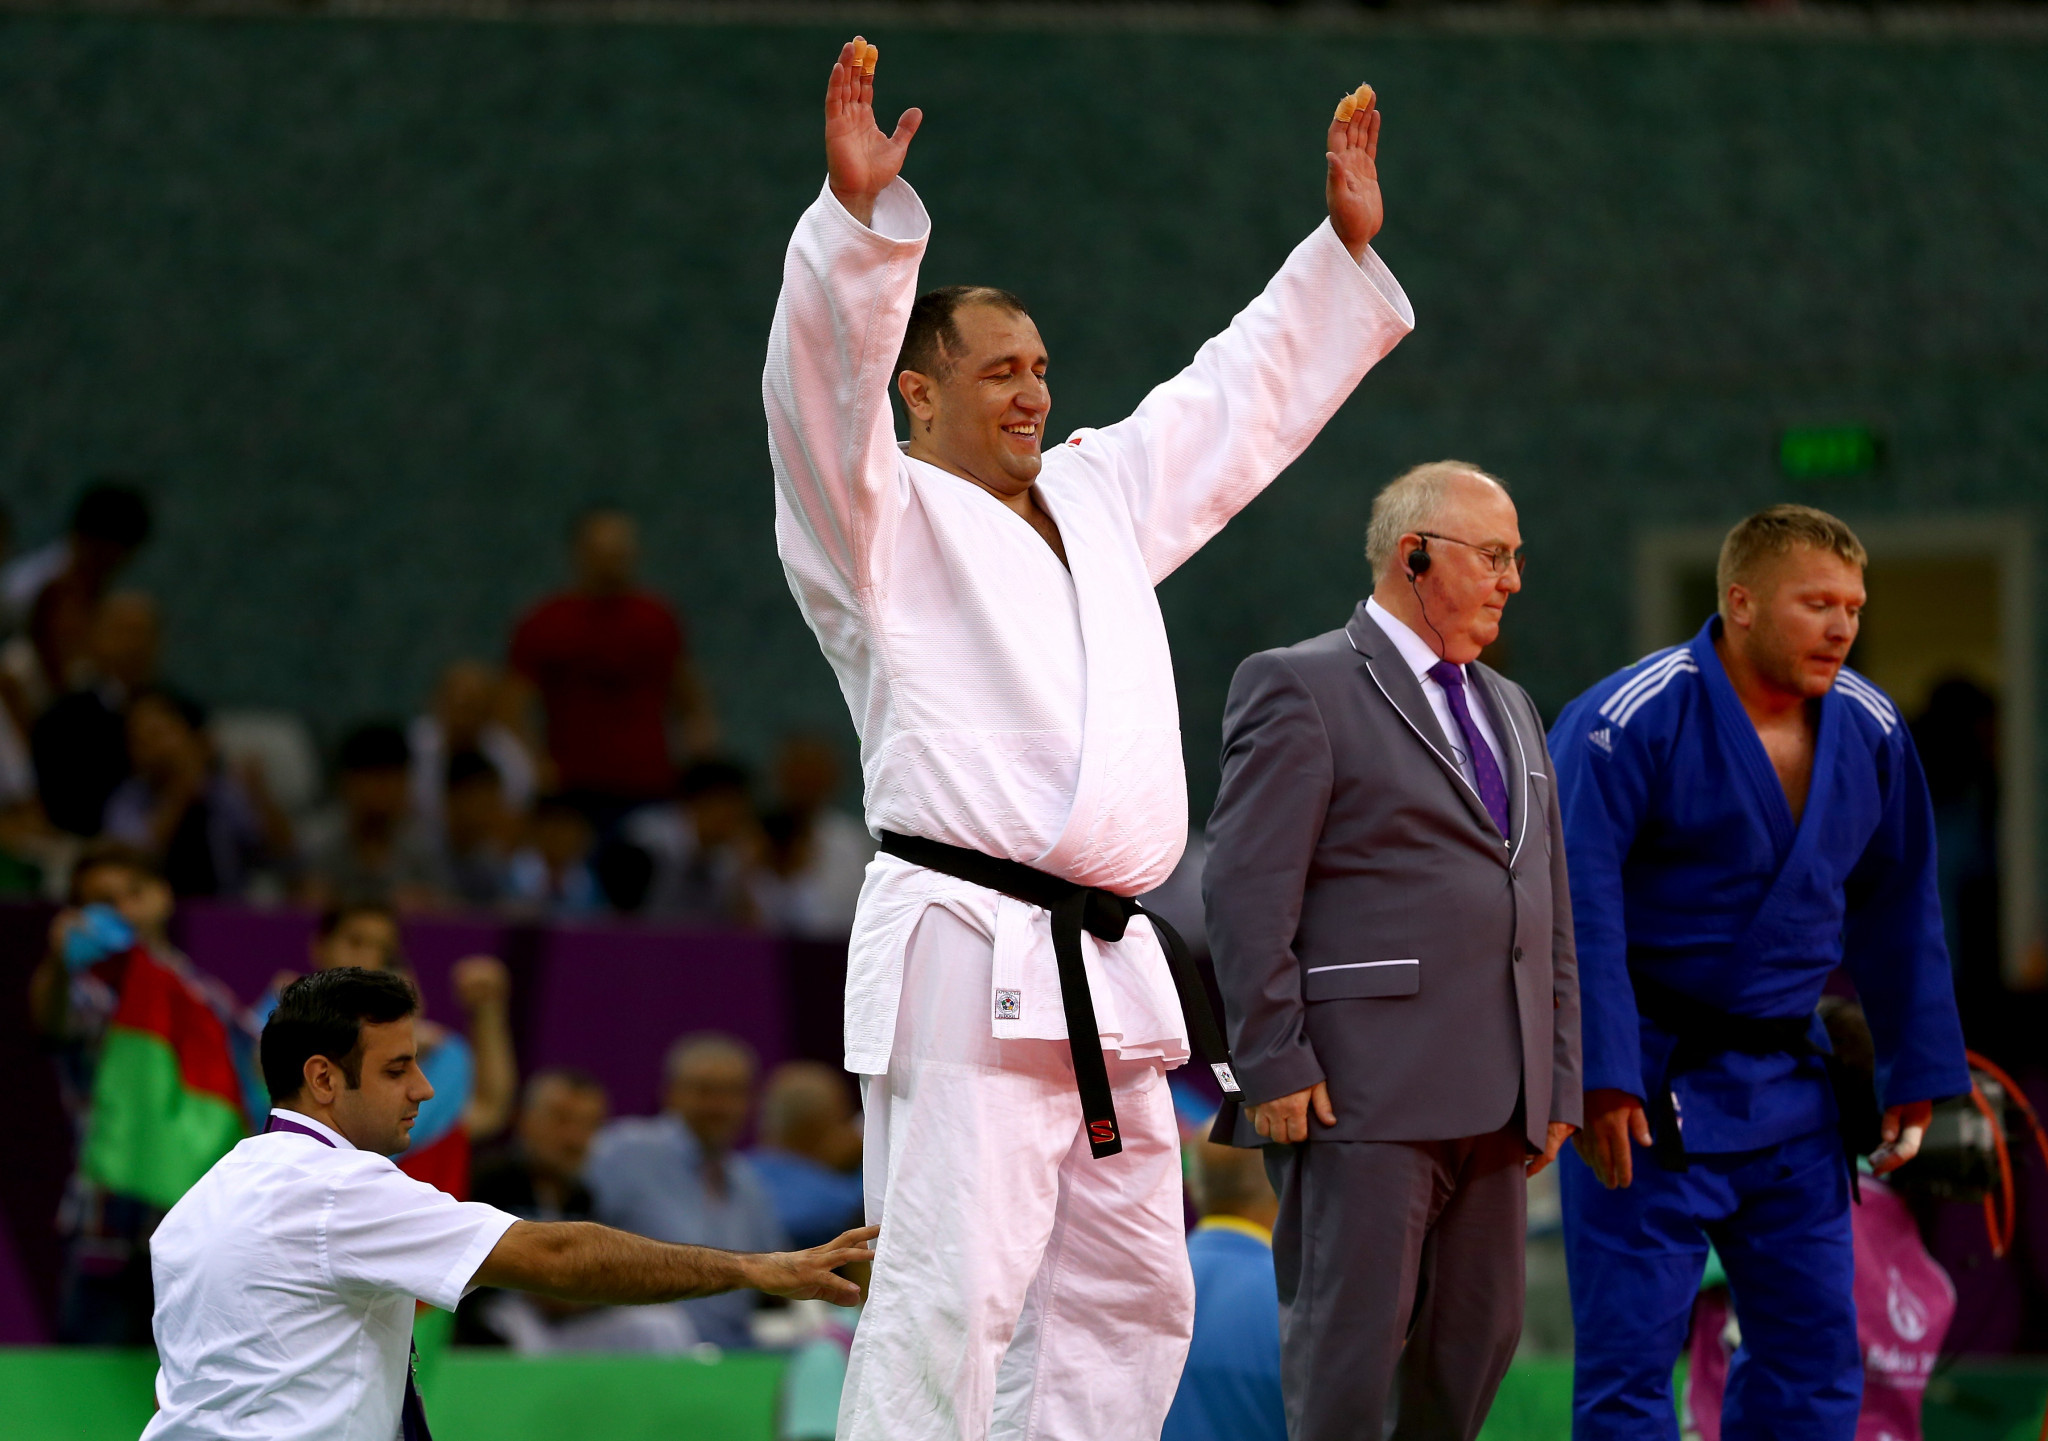 Azerbaijan’s Ilham Zakiyev is a member of the International Judo Federation's Hall of Fame and looks to qualify for his fifth Paralympic Games at the IBSA Paralympic qualification on offer at IBSA Judo World Championships in Portugal ©Getty Images